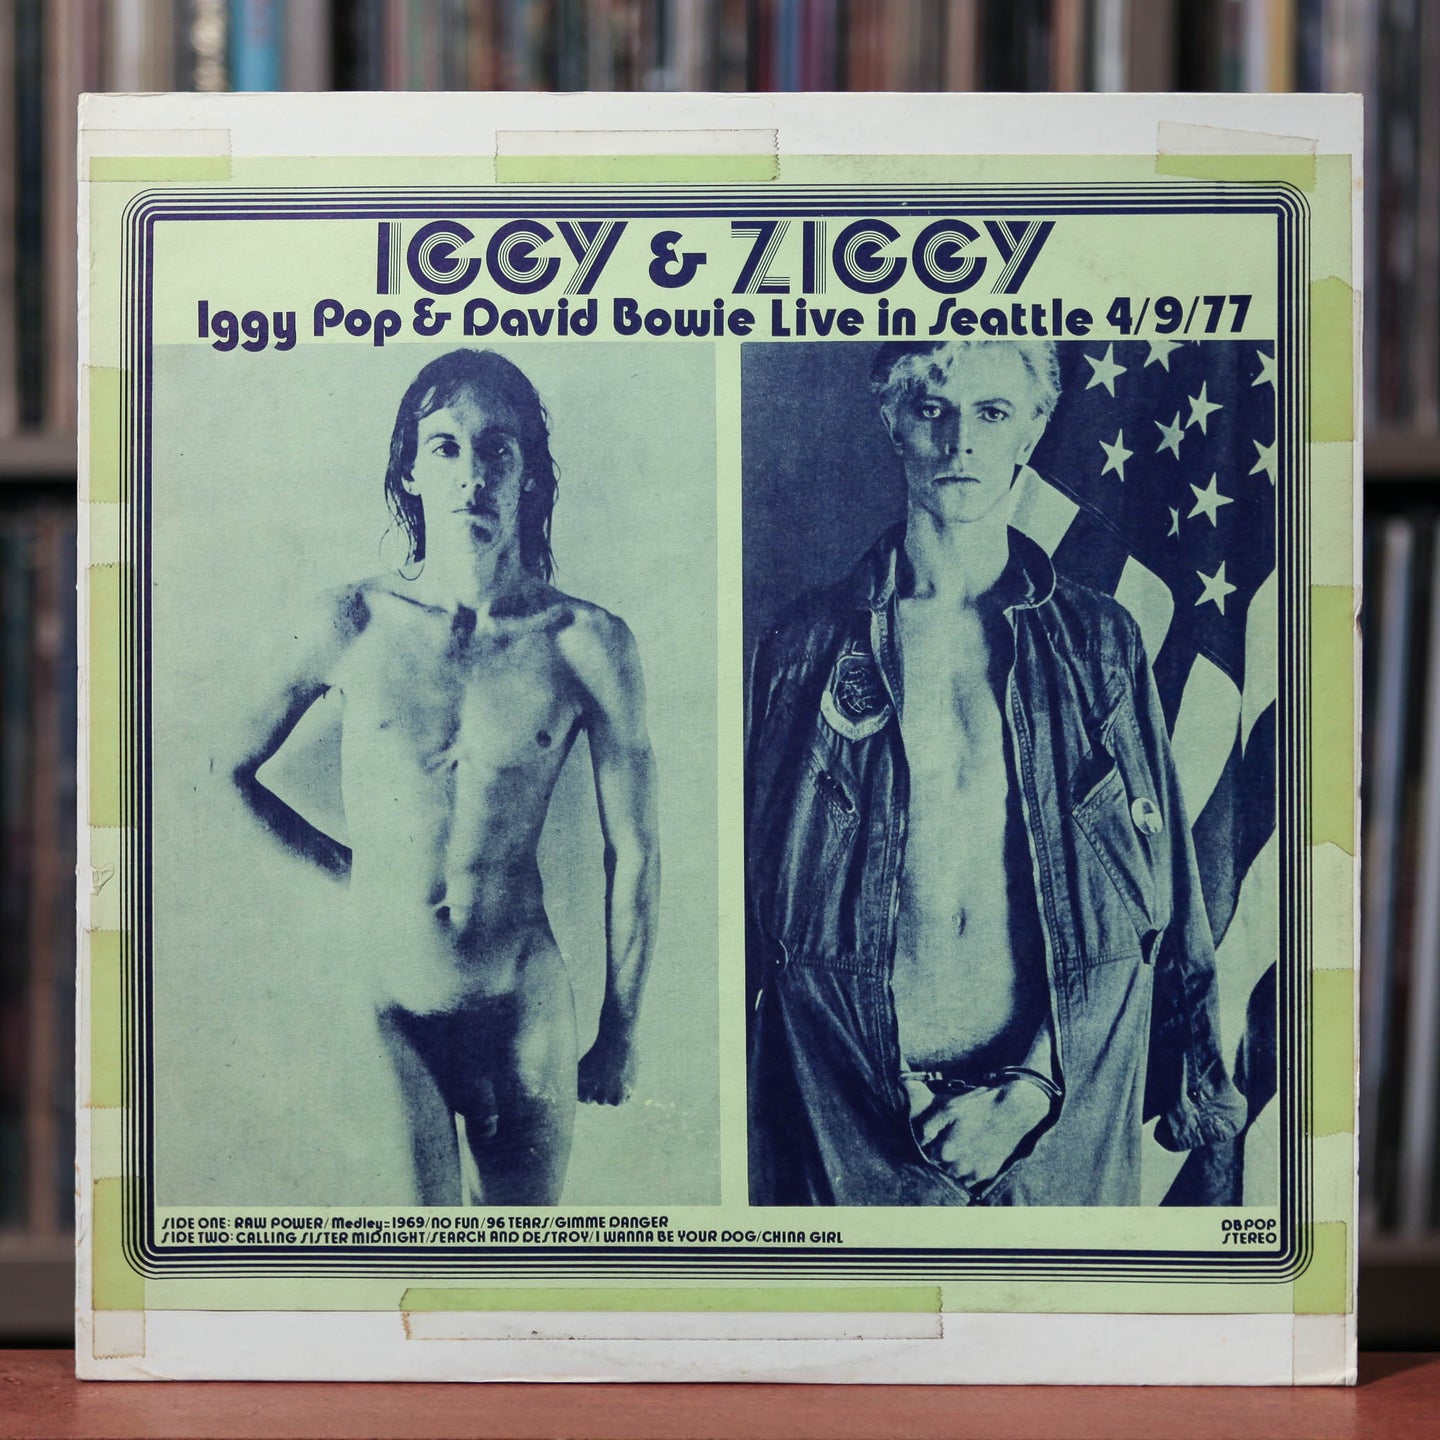 Iggy Pop & David Bowie - Iggy Pop & David Bowie Live In Seattle 4/9/77 - 1977 Dragonfly,VG/EX